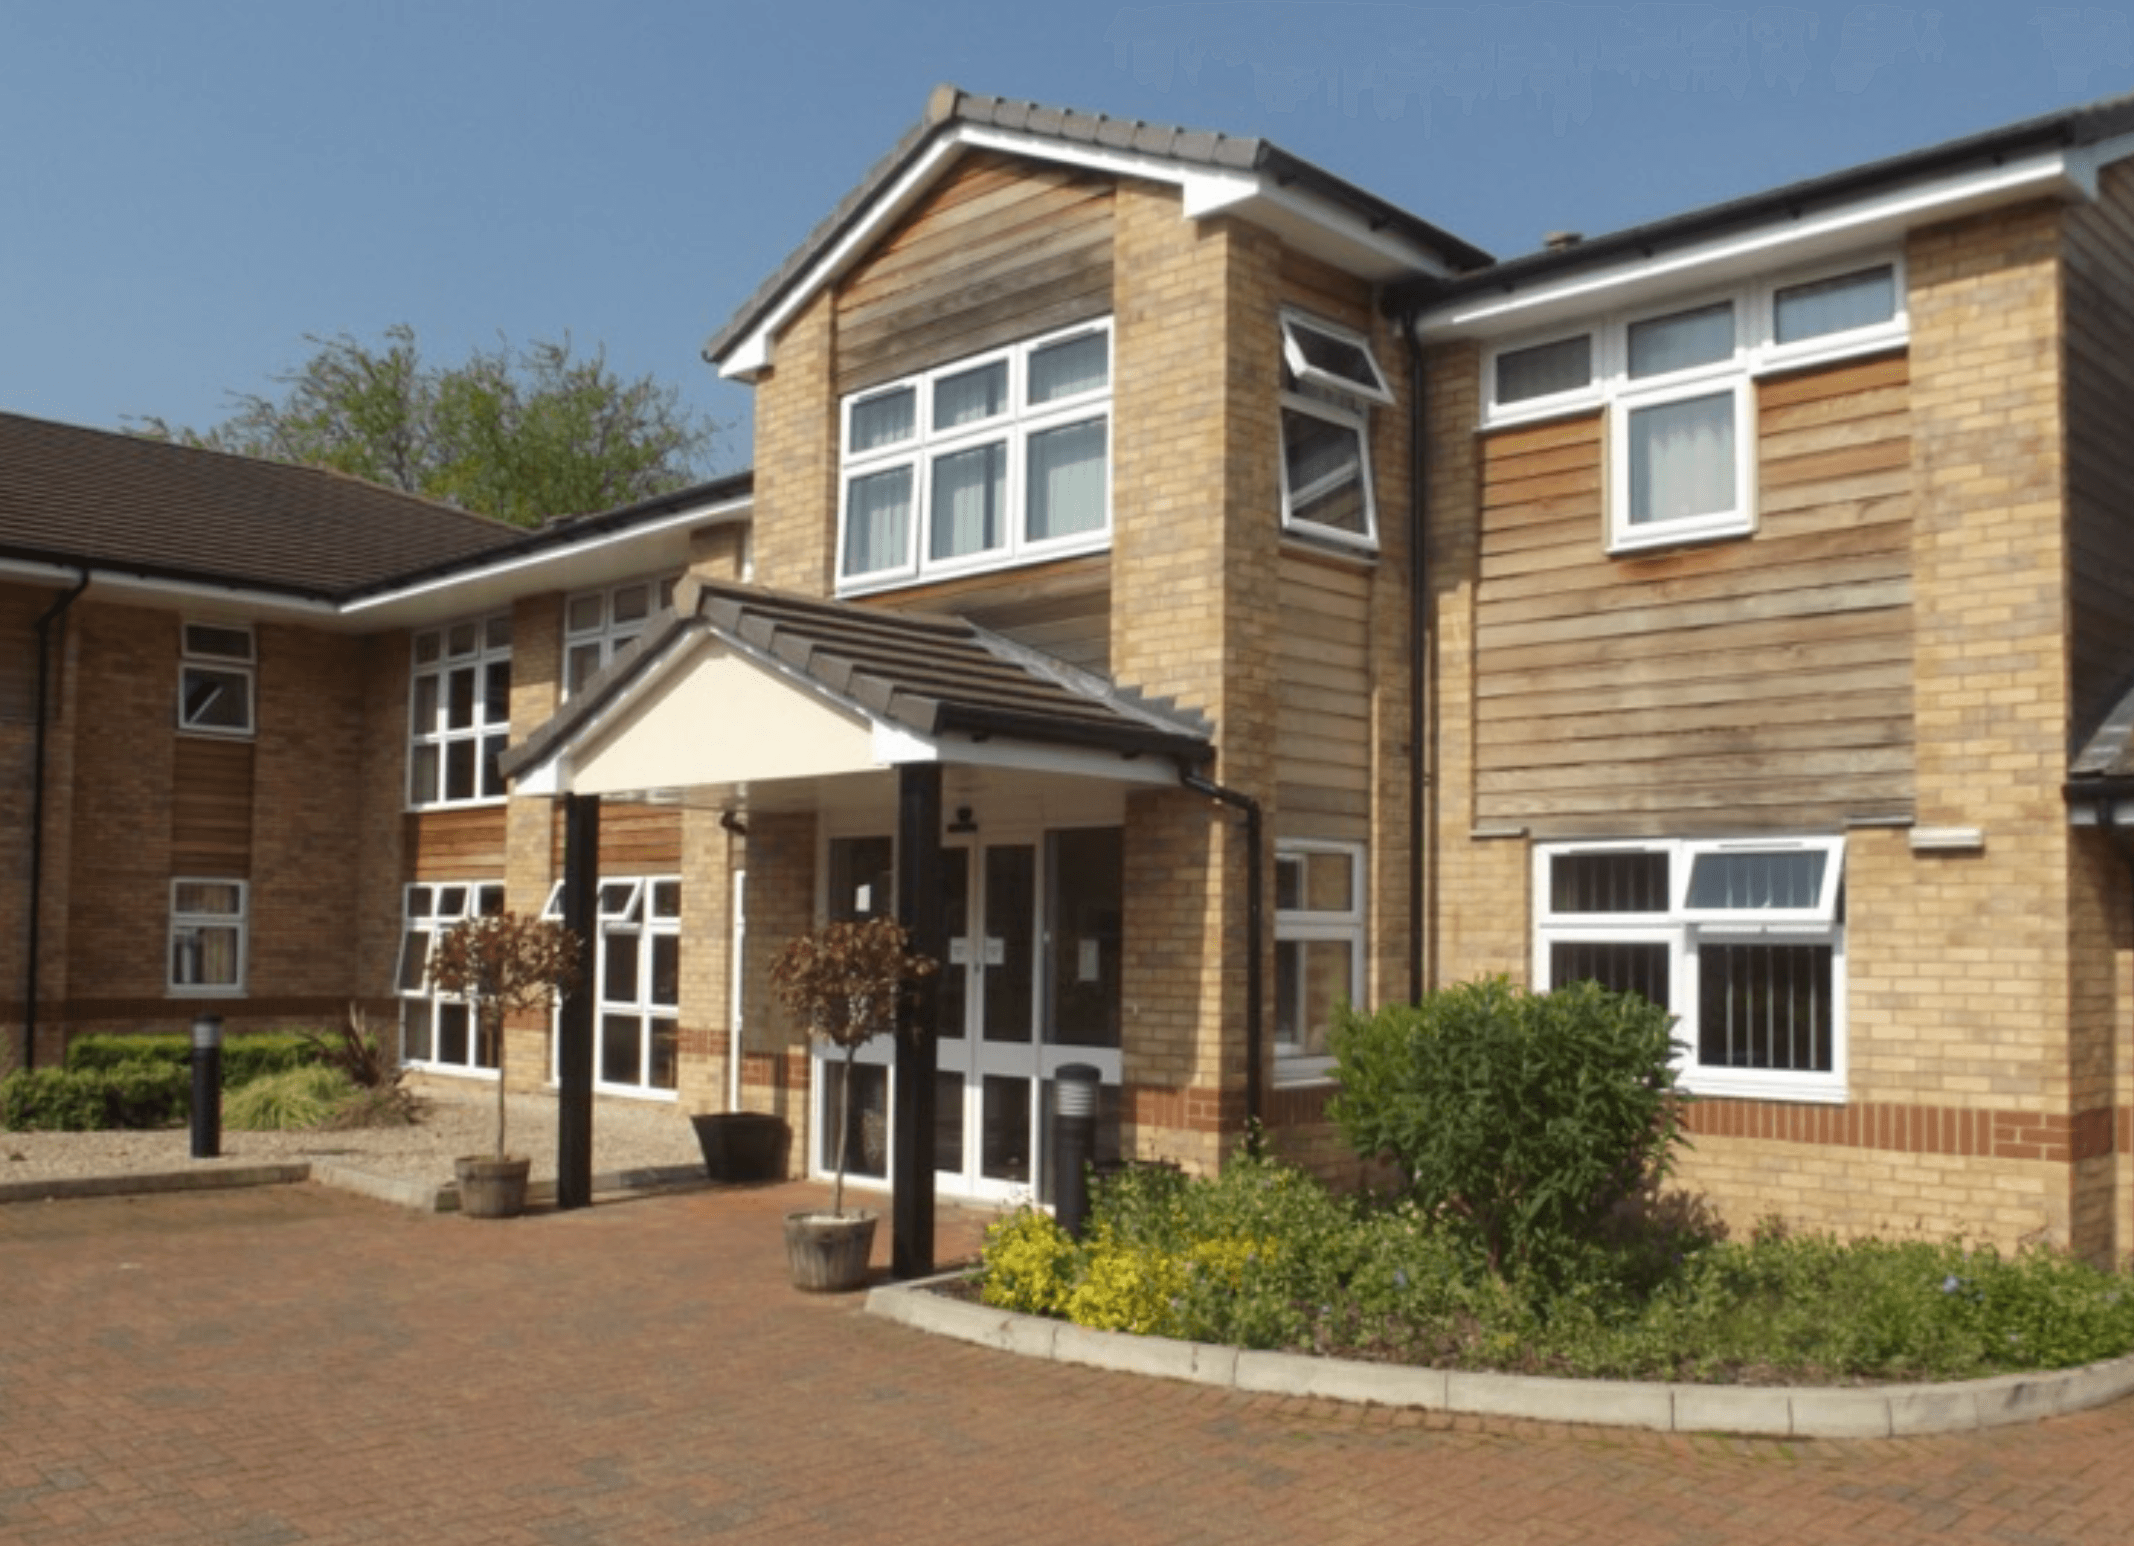 Lewin House care home in Aylesbury 1